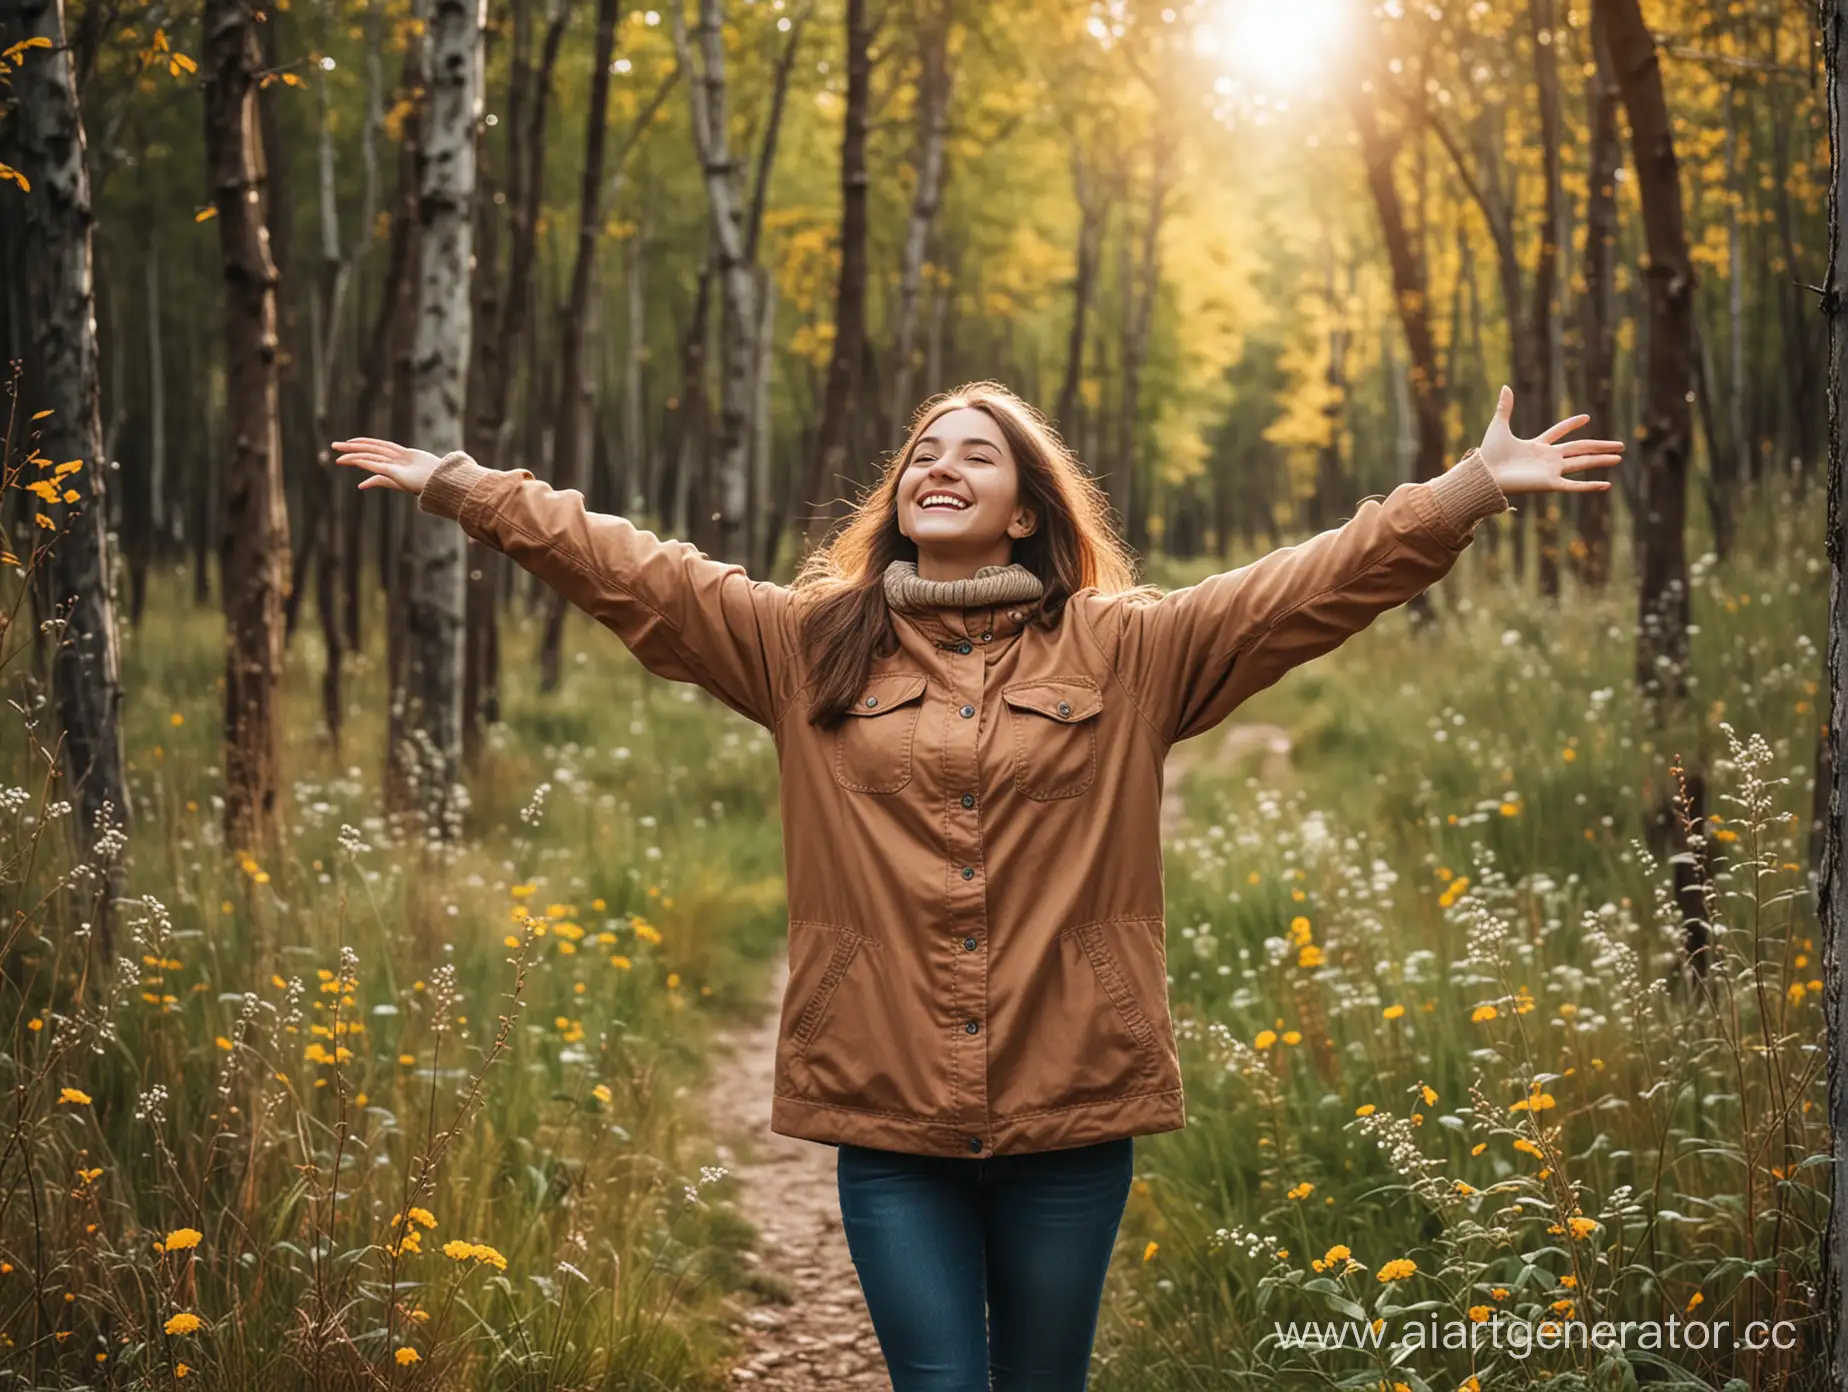 Joyful-Girl-Embracing-Nature-with-Outstretched-Arms